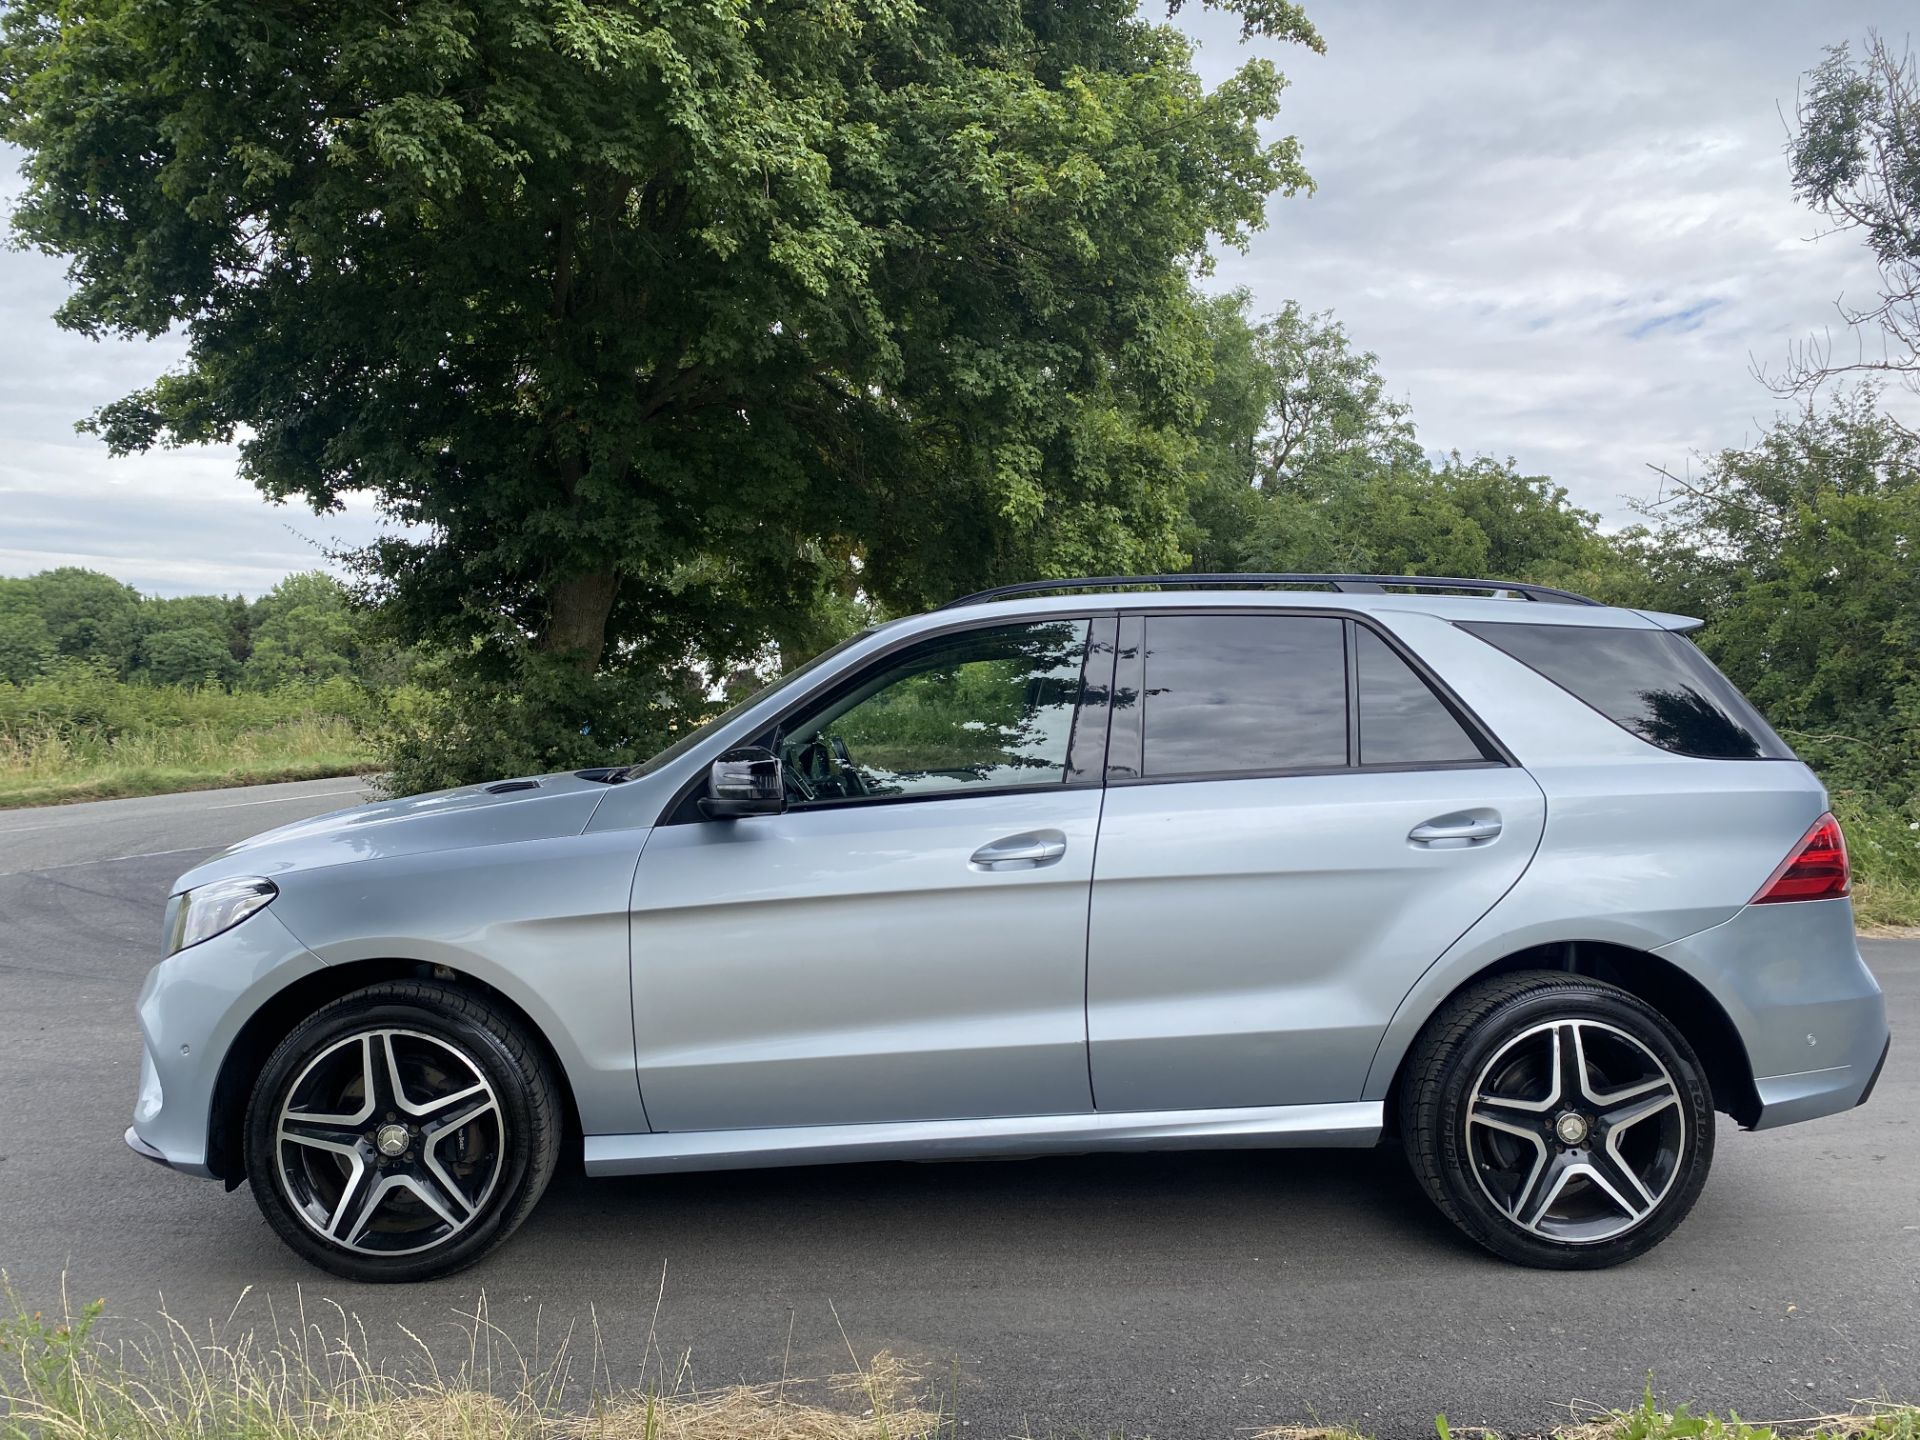 MERCEDES GLE 250d AMG-LINE "NIGHT EDITION" AUTO - 17 REG - 1 OWNER - FULL LEATHER - COMAND - NO VAT! - Image 6 of 36